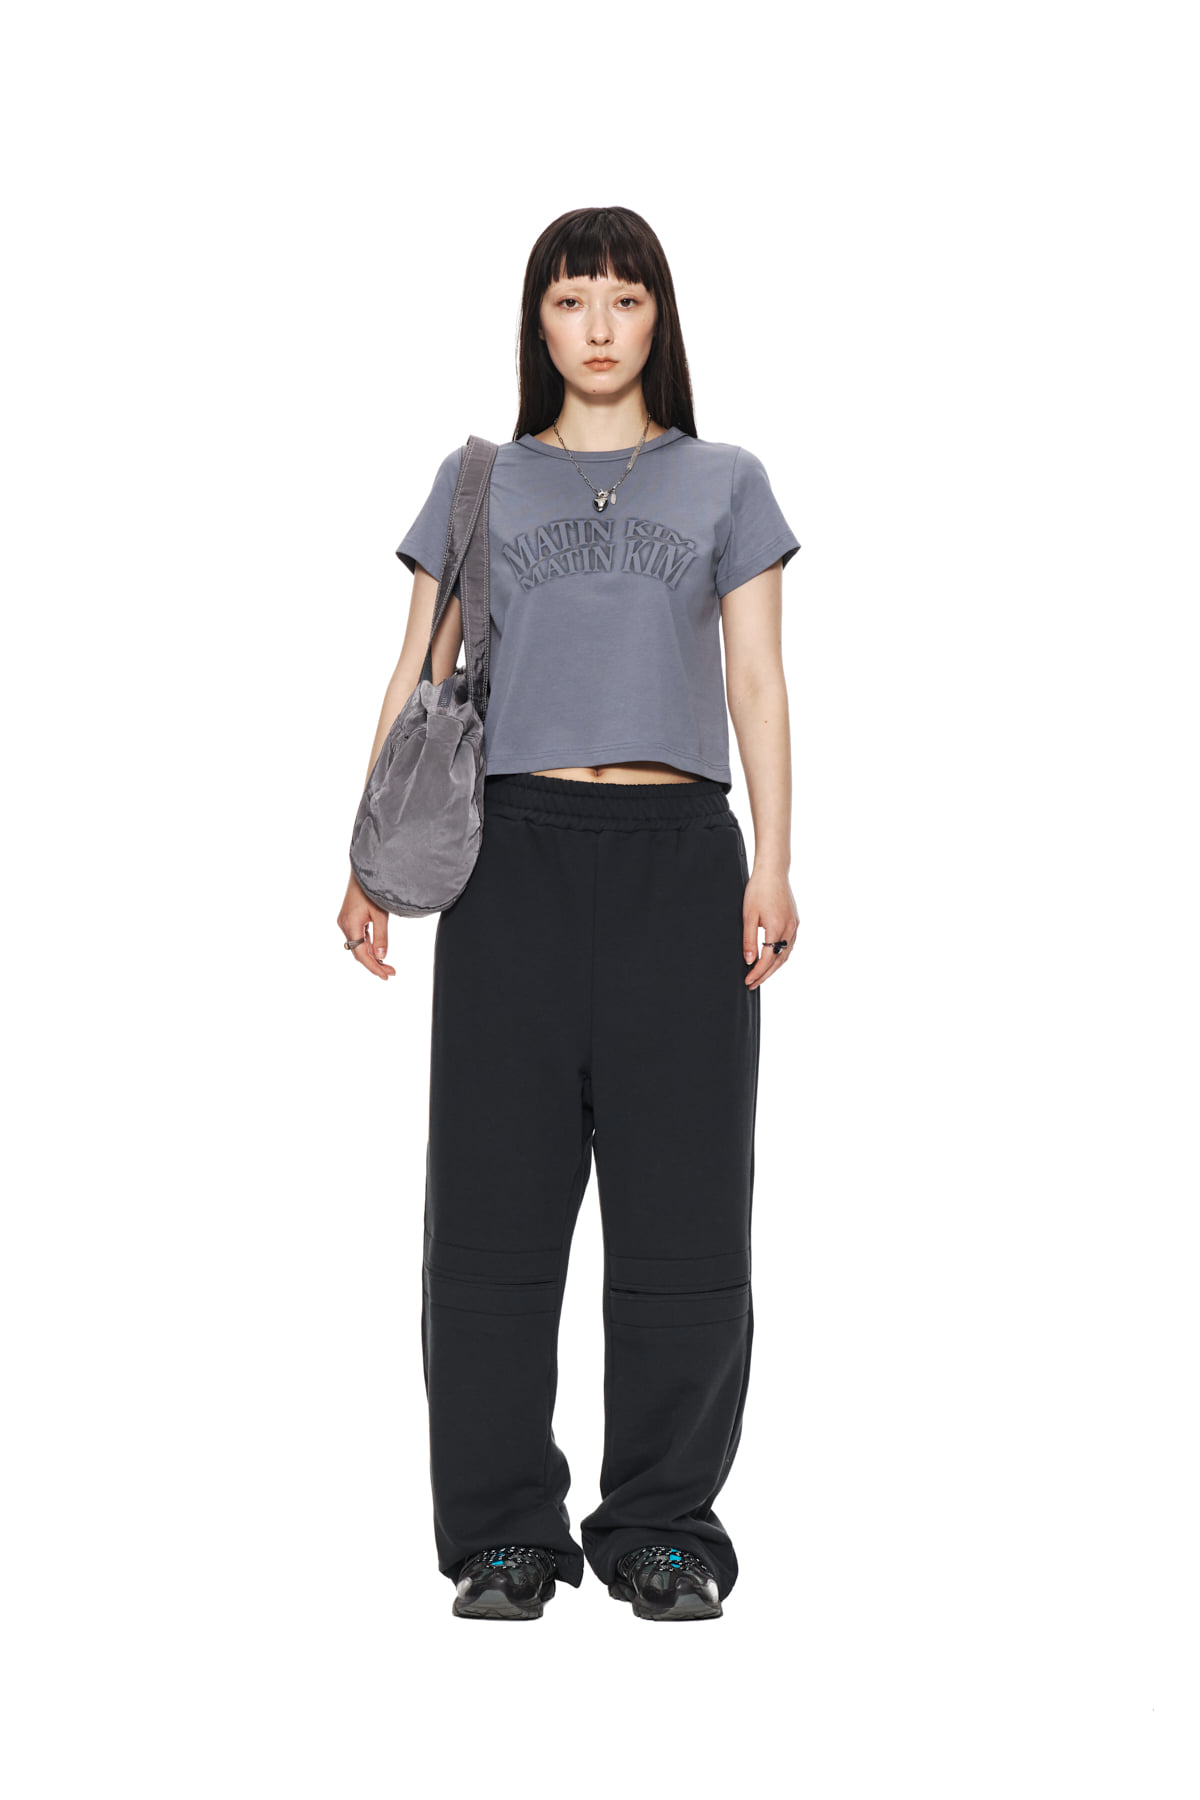 KNEE CUT OUT SWEATPANTS IN CHARCOAL